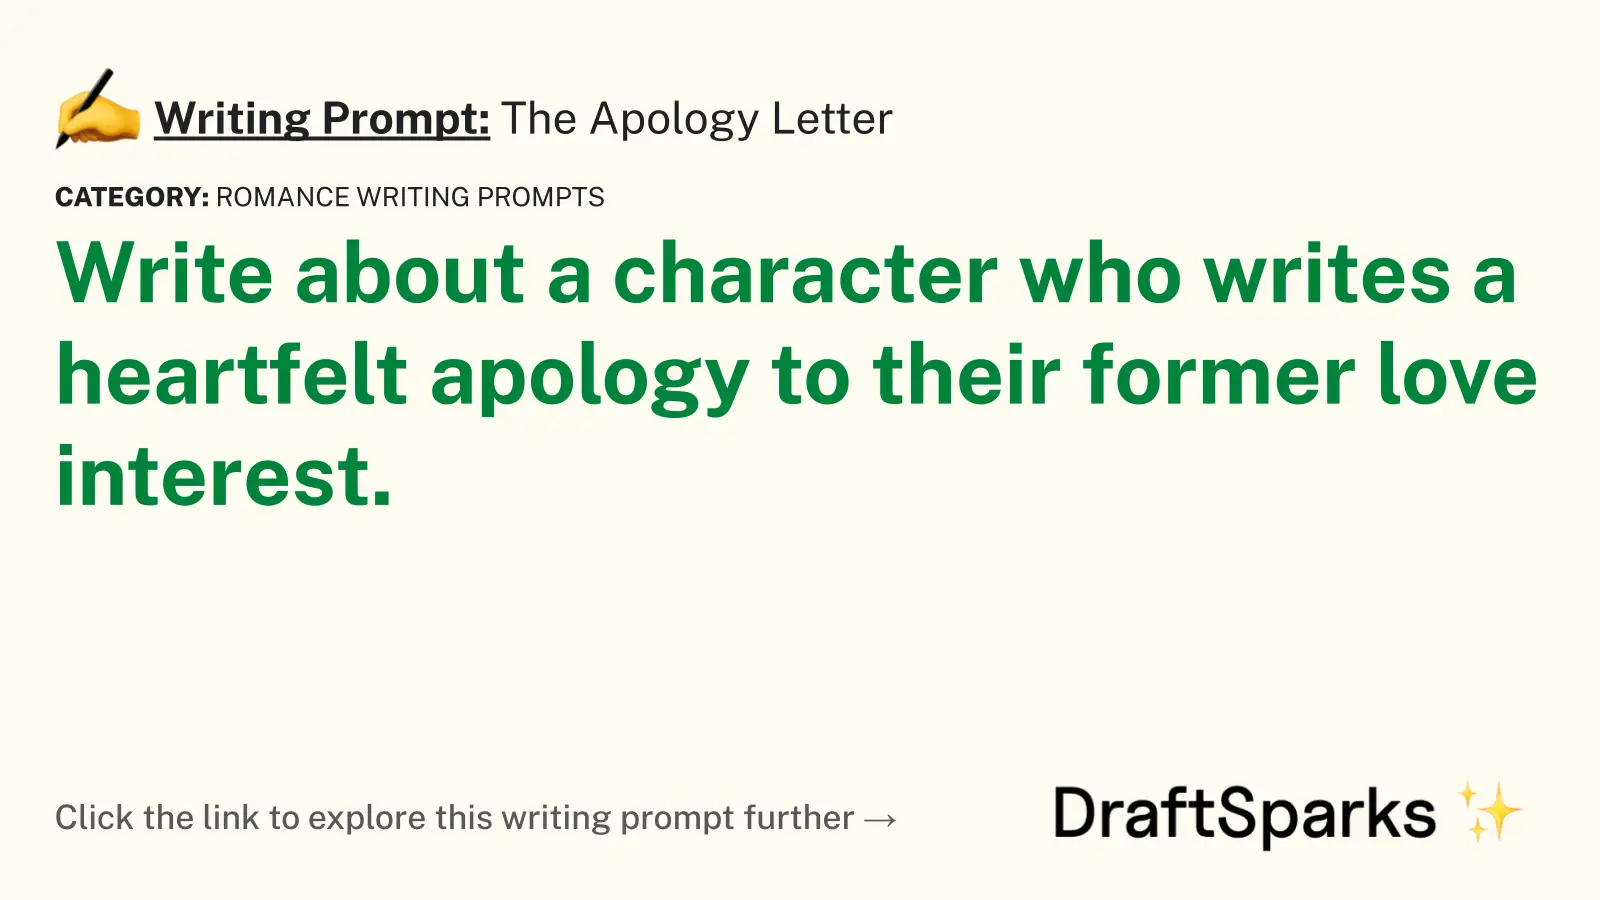 The Apology Letter